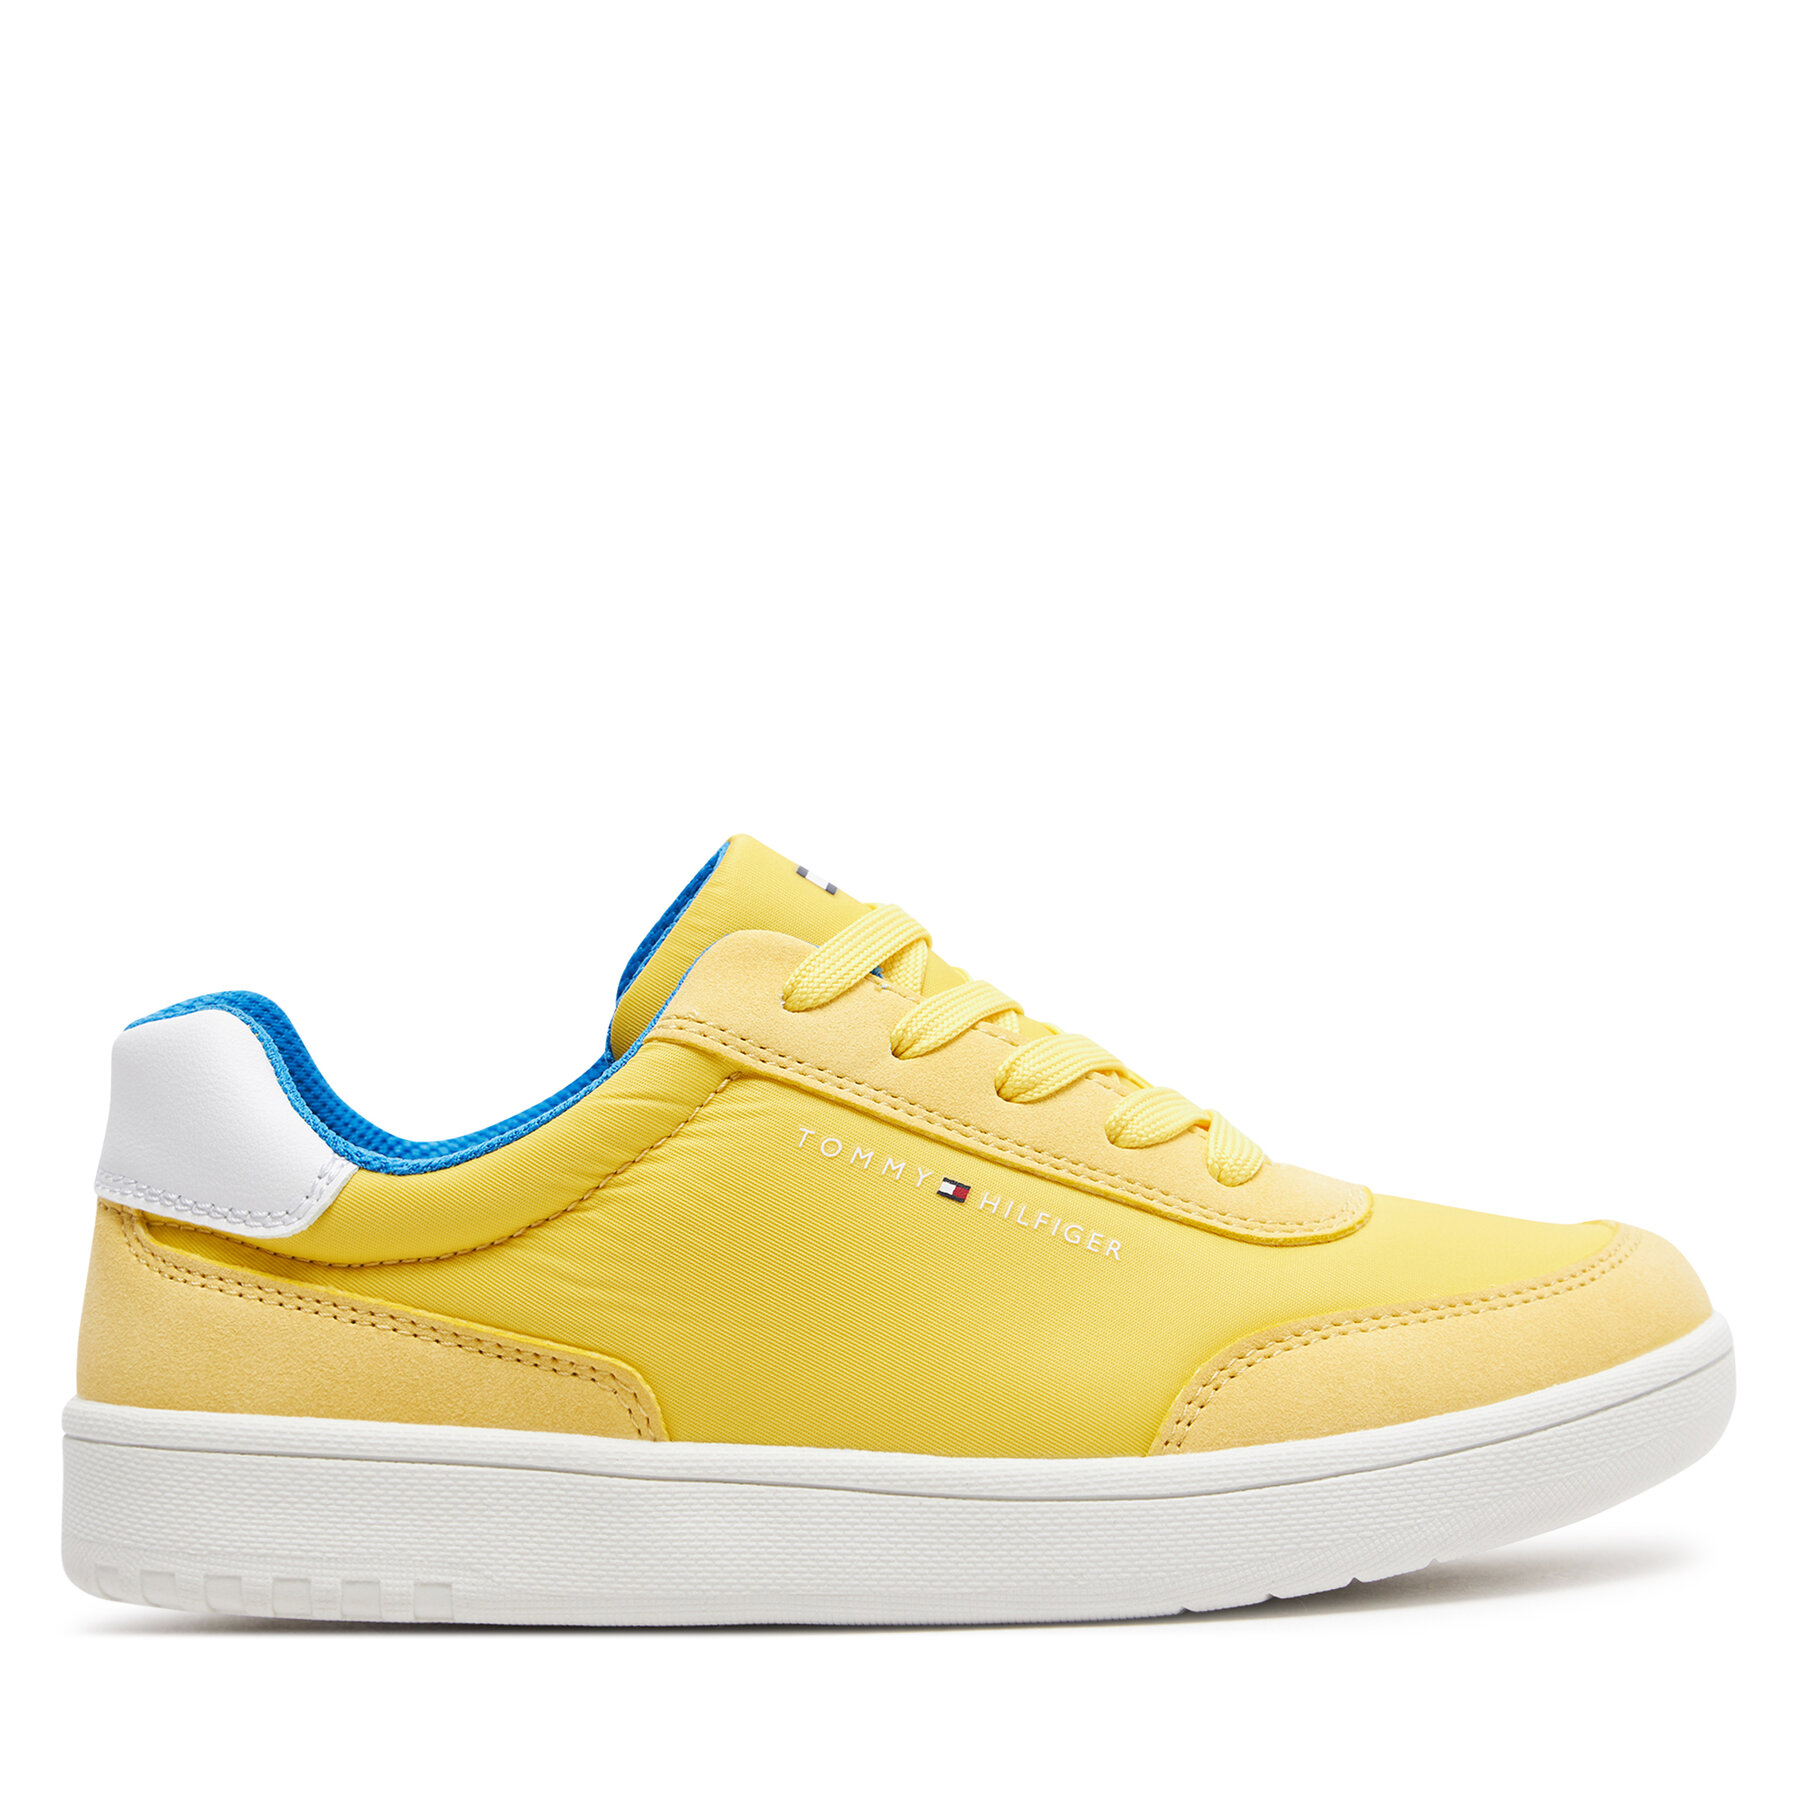 Sneakers Tommy Hilfiger Low Cut Lace-Up Sneaker T3X9-33351-1694 S Yellow 200 von Tommy Hilfiger